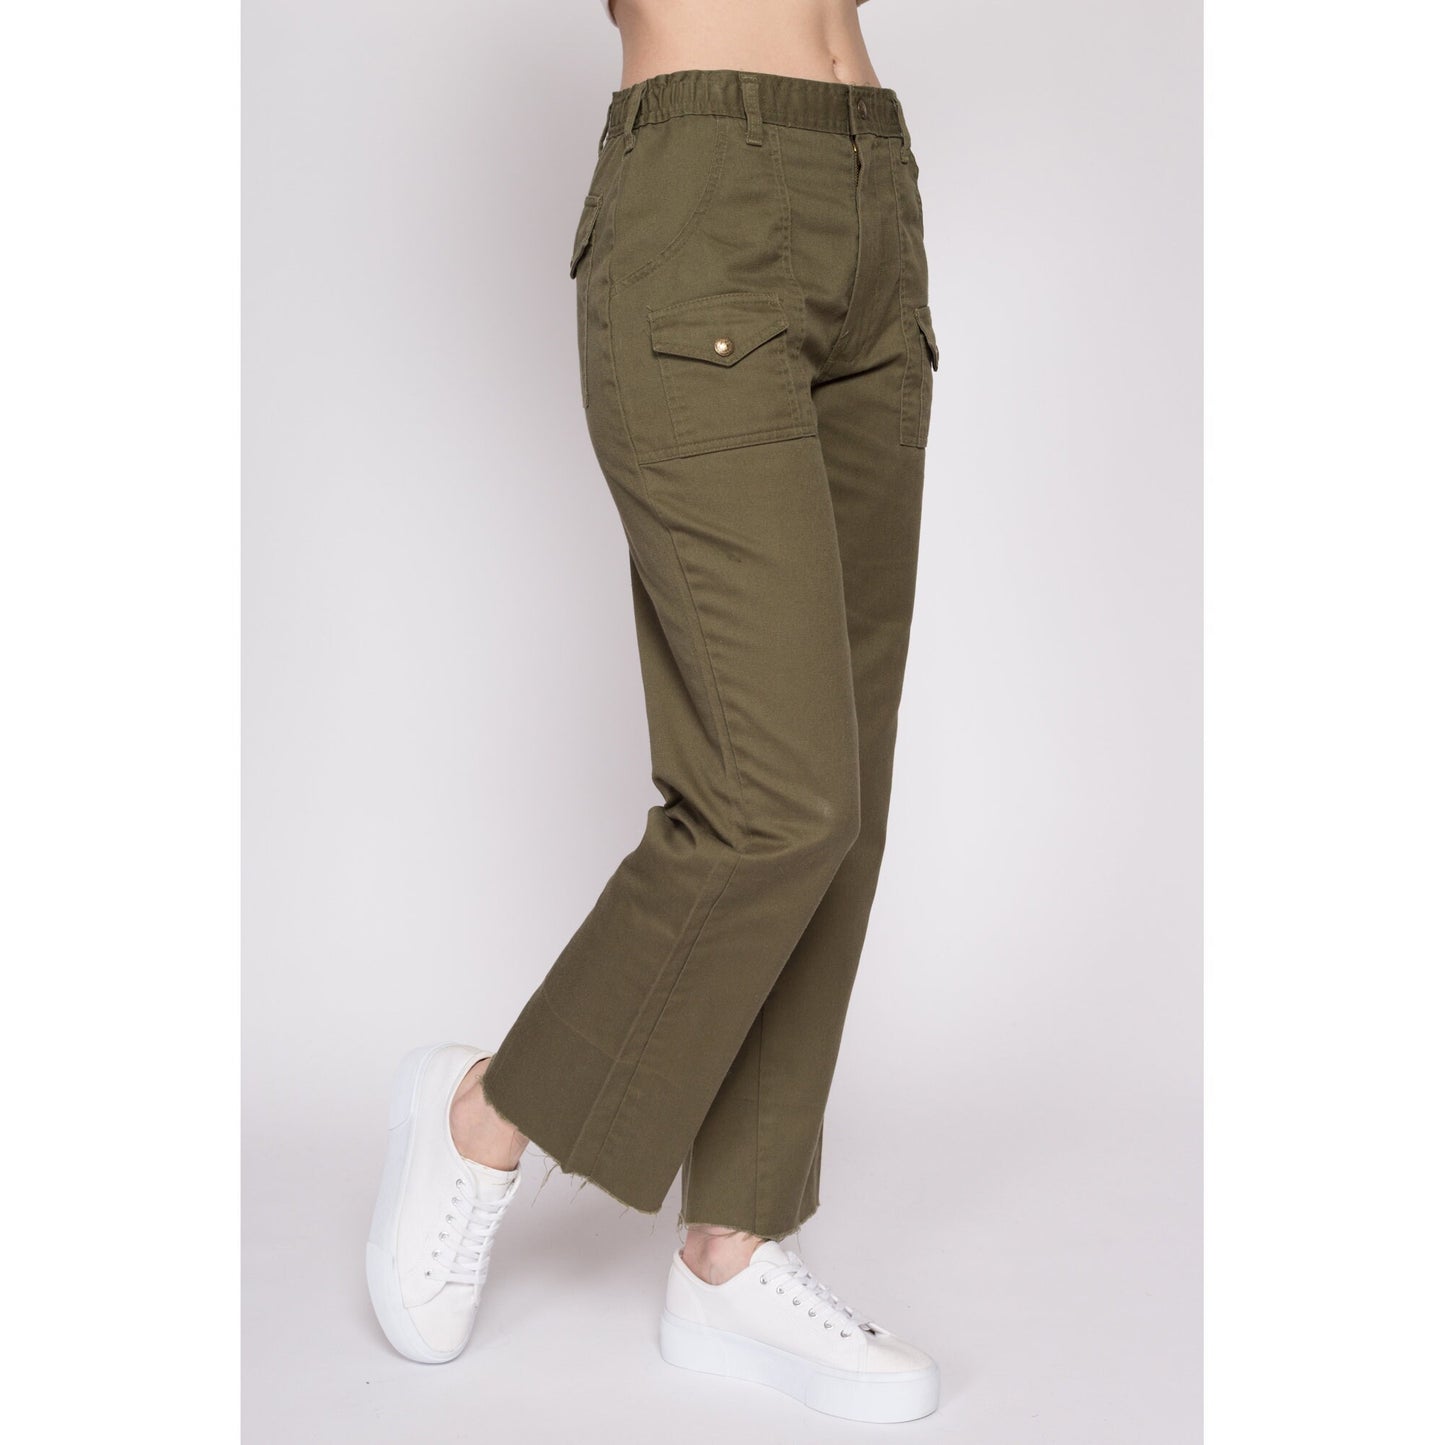 Sml-Med 70s Boy Scout Uniform Pants 27"-29" | Vintage High Waisted Olive Green Utility Cargo Trousers